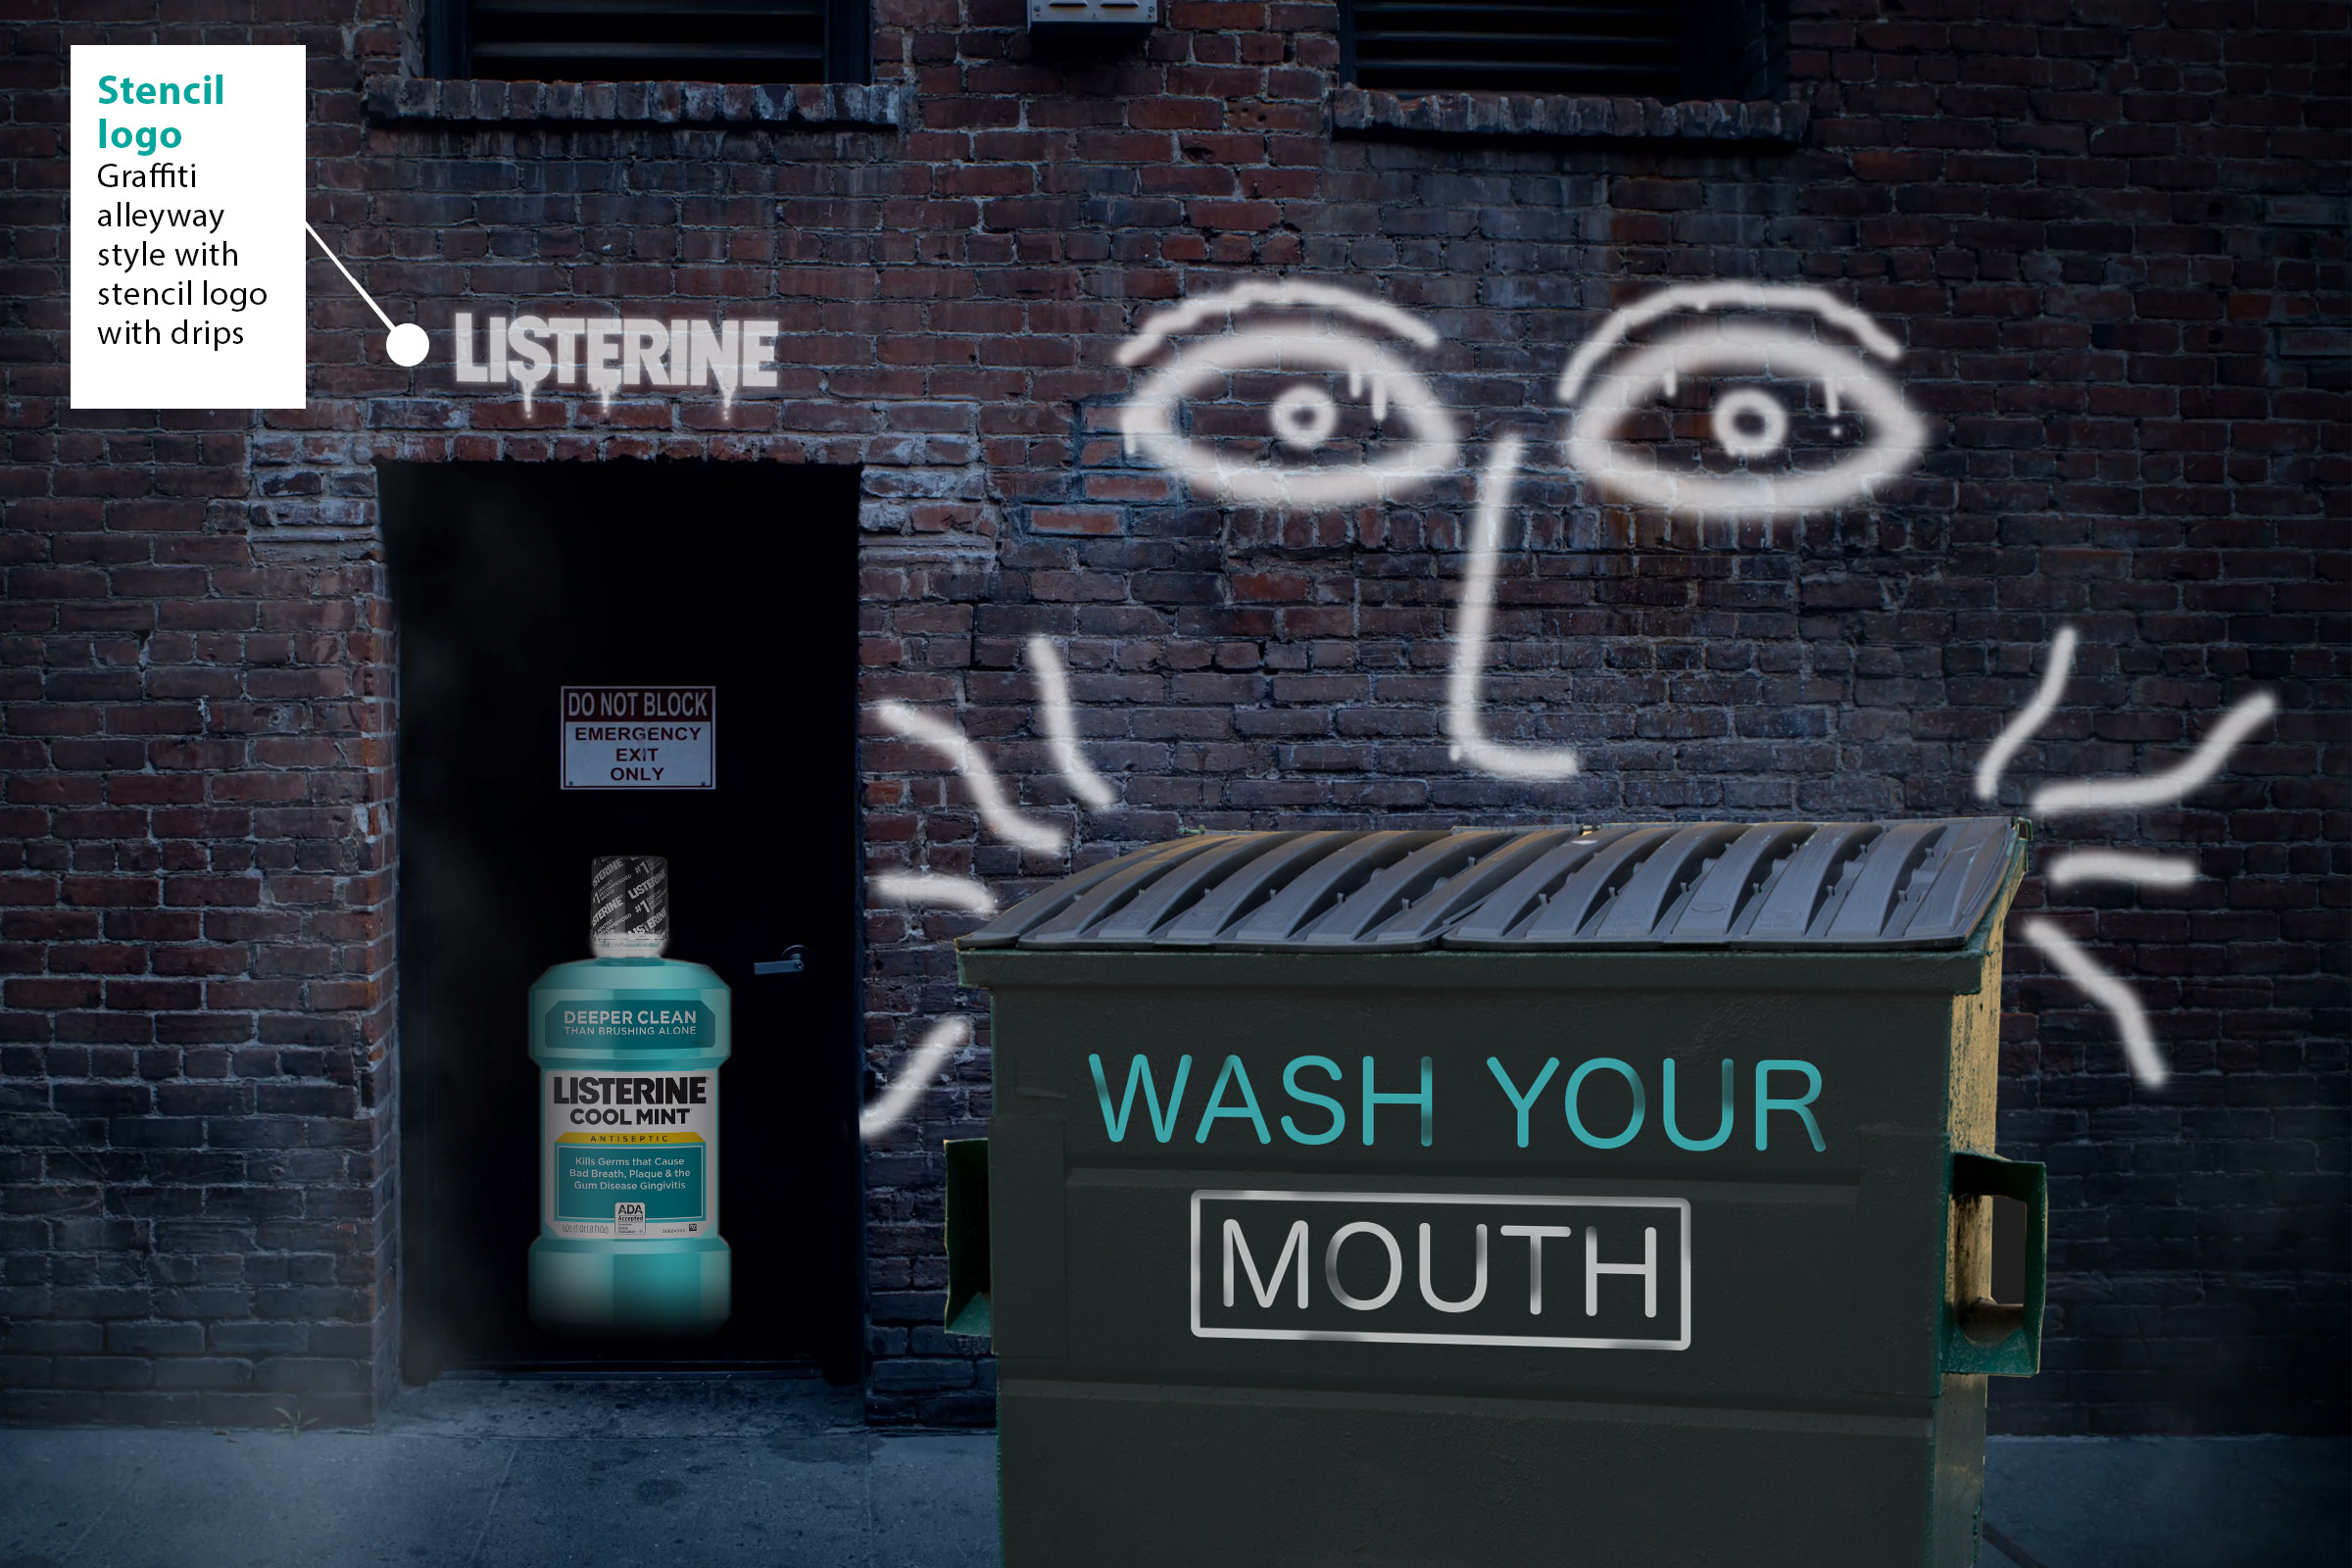 Listerine-Wash_Your_Mouth_Outdoor_logo.jpg